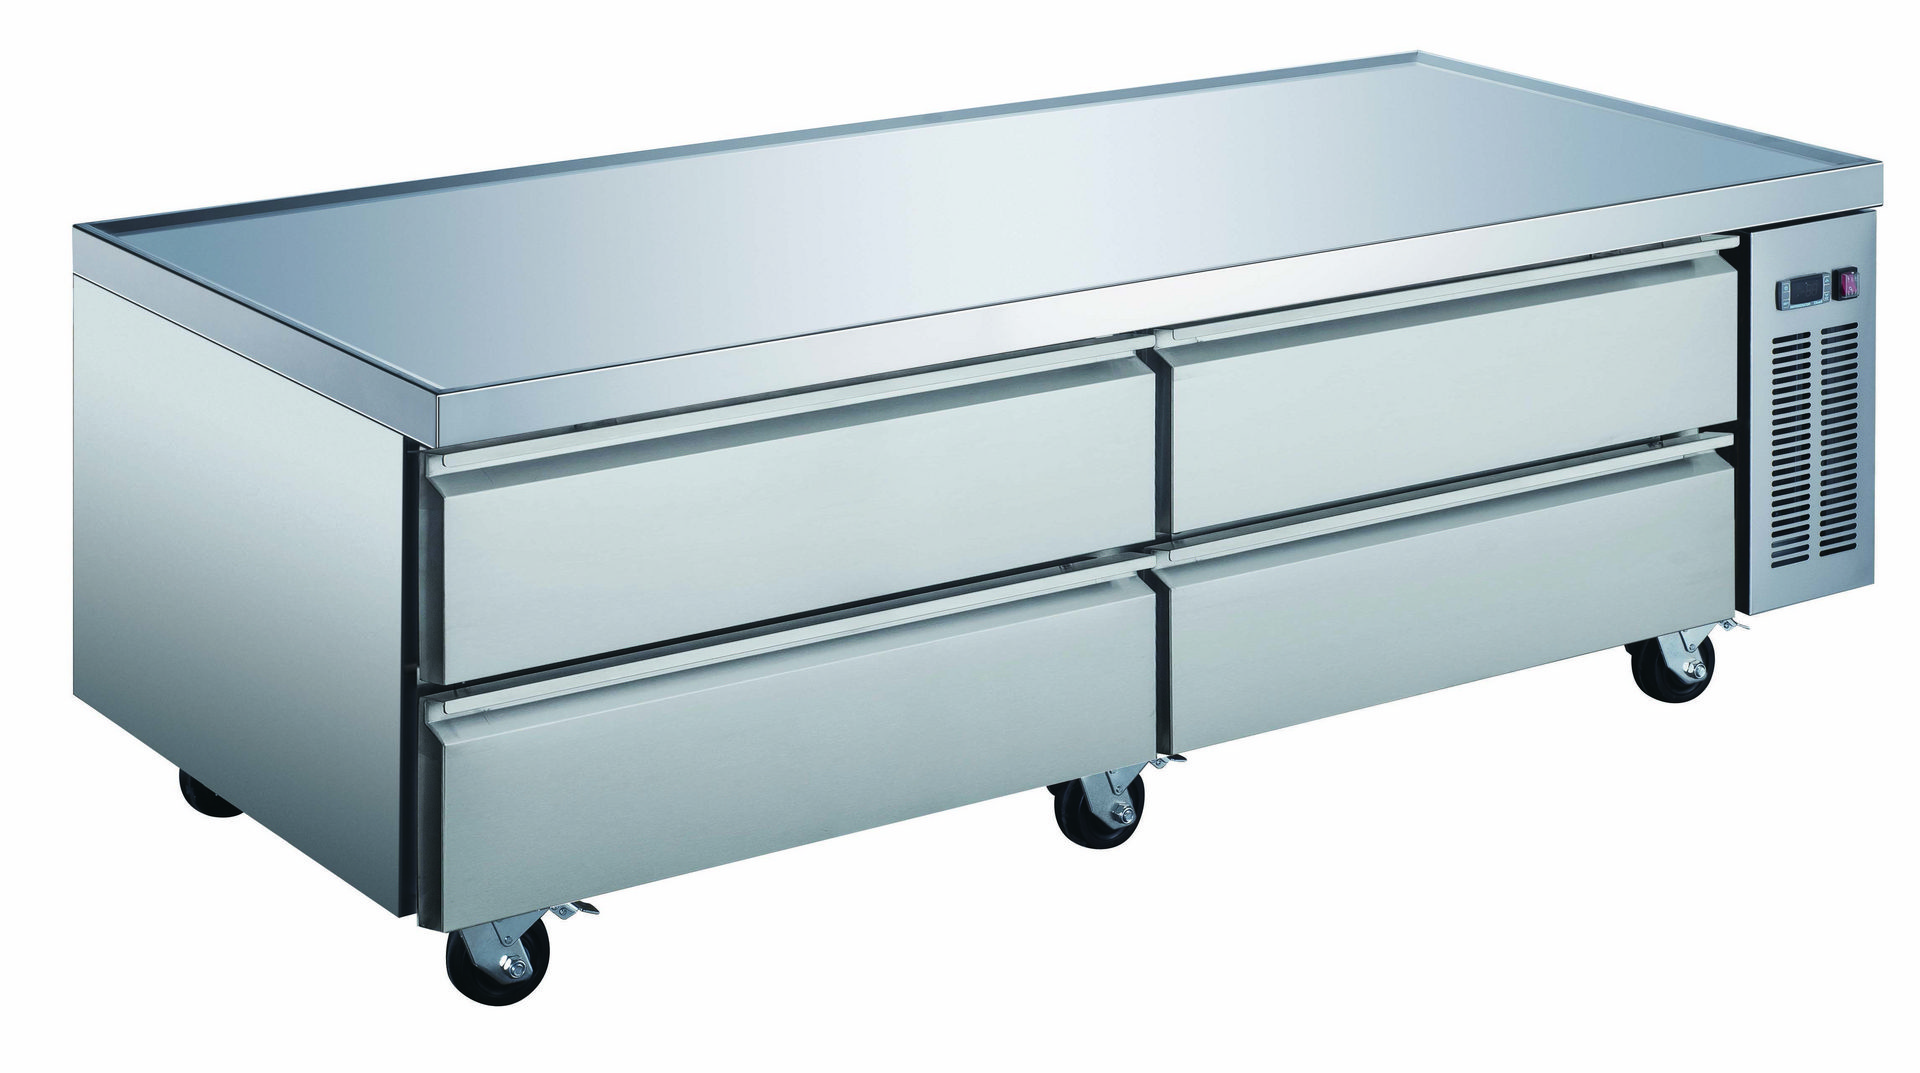 A stainless steel table with four drawers on it.